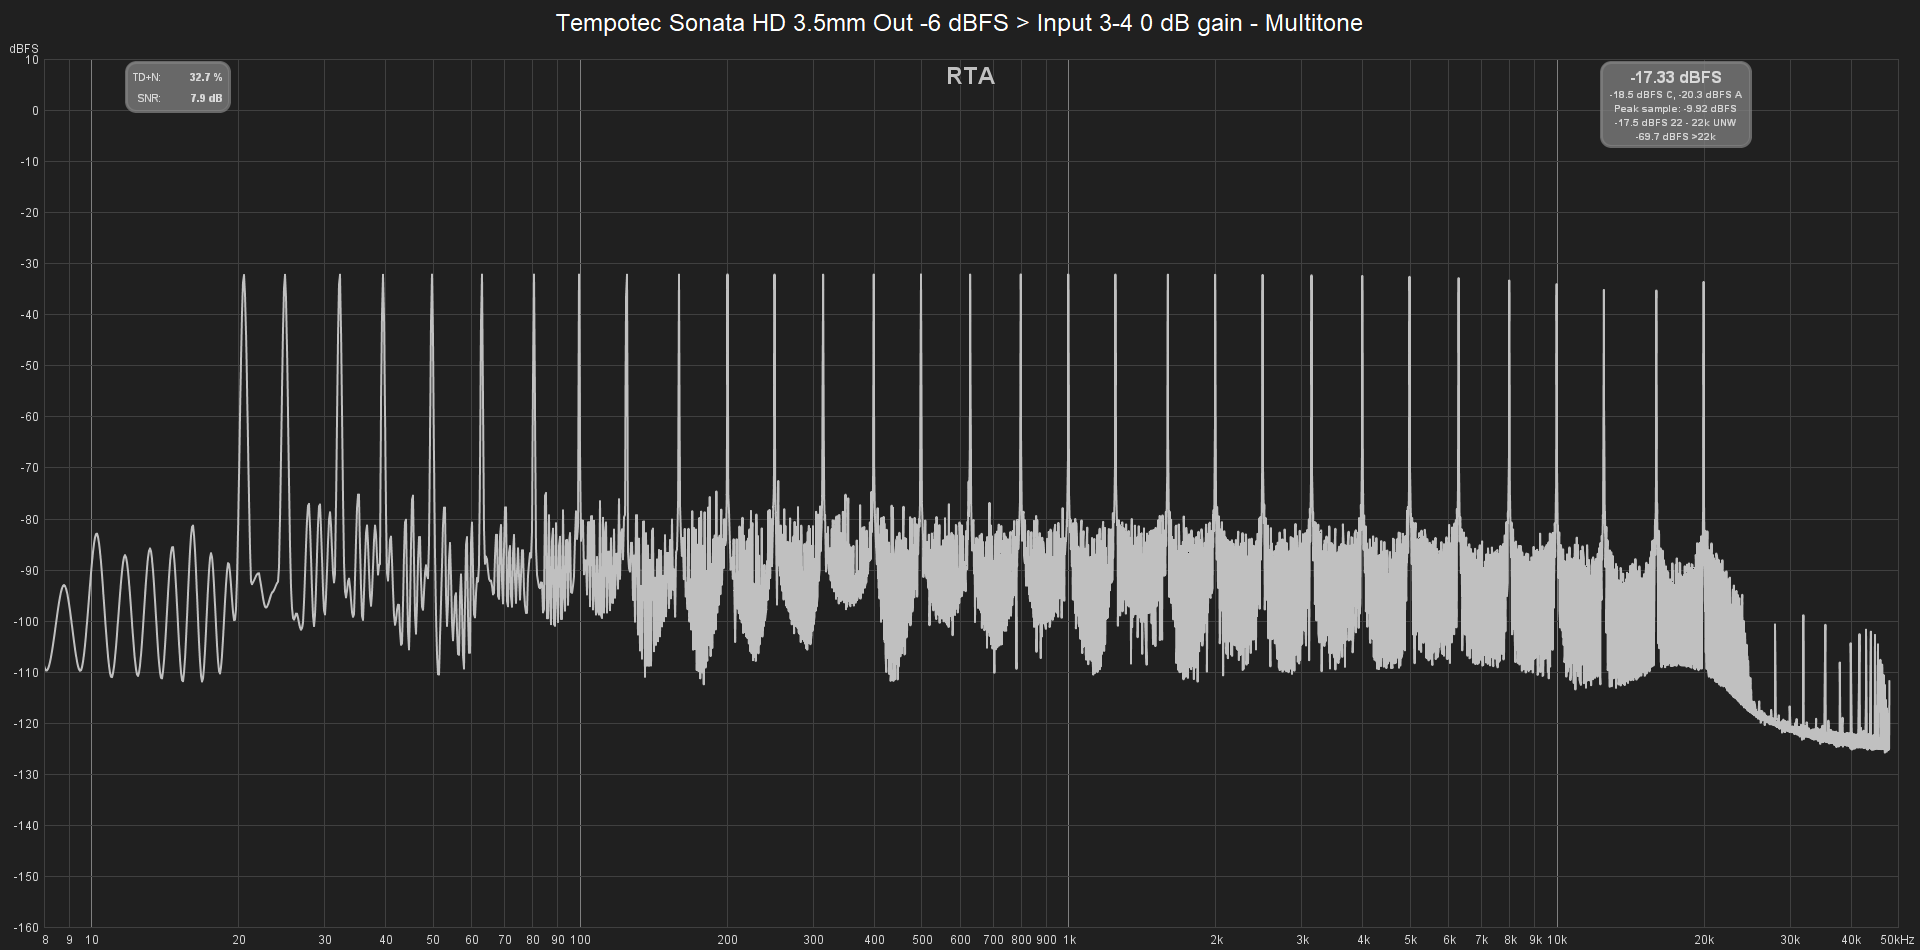 Tempotec Sonata HD 3.5mm Out -6 dBFS to Input 3-4 0 dB gain - Multitone.png